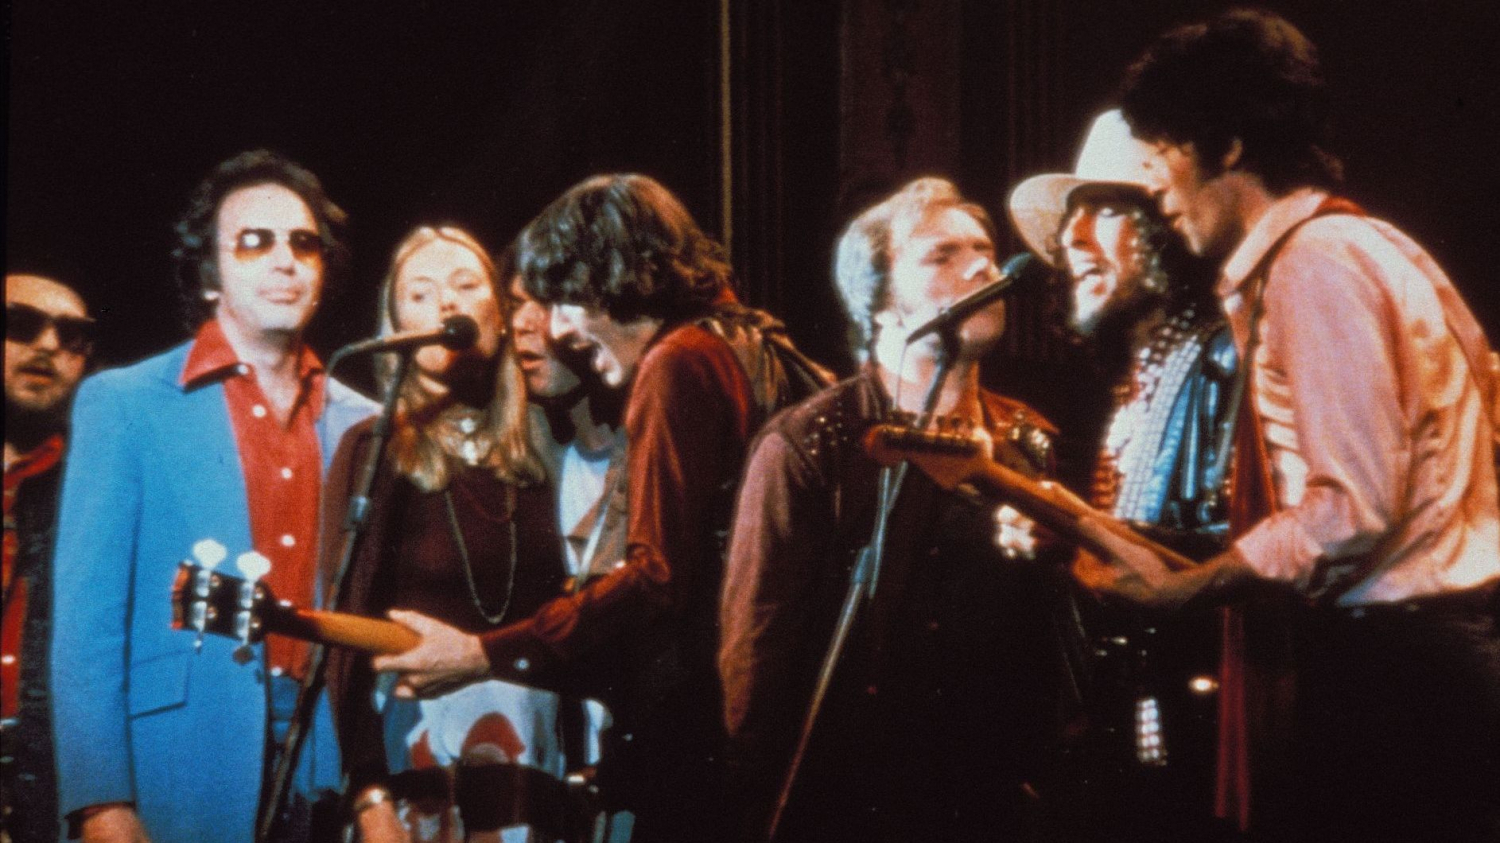 Bob Dylan, Joni Mitchell, Van Morrison, Neil Young & The Band in ‘The Alternate Last Waltz’